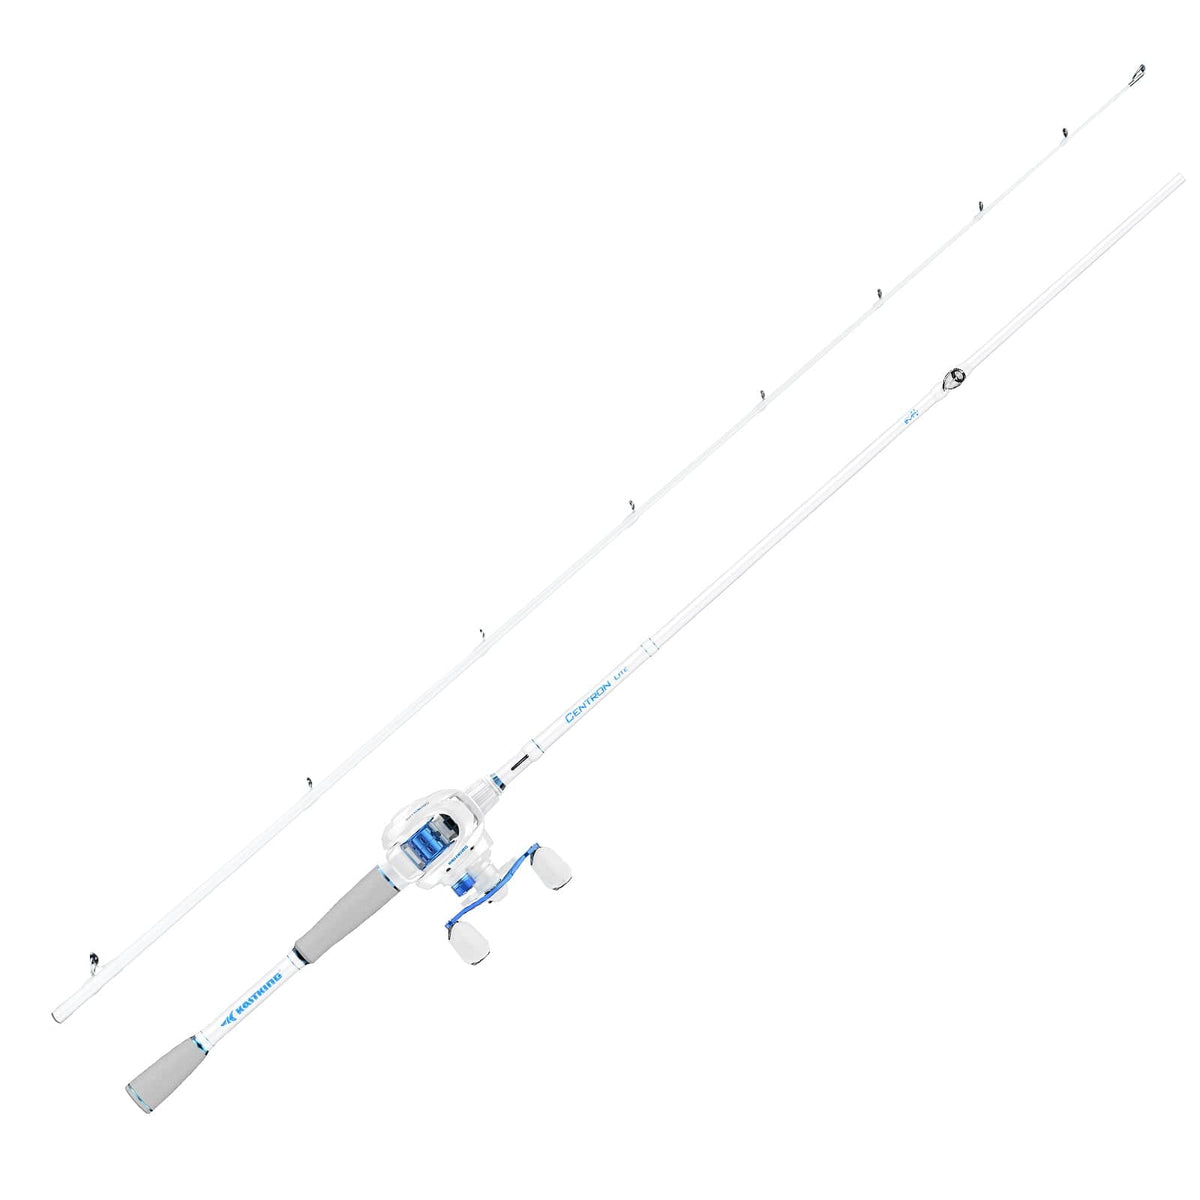 KastKing Centron Lite Casting Rod and Reel Combo